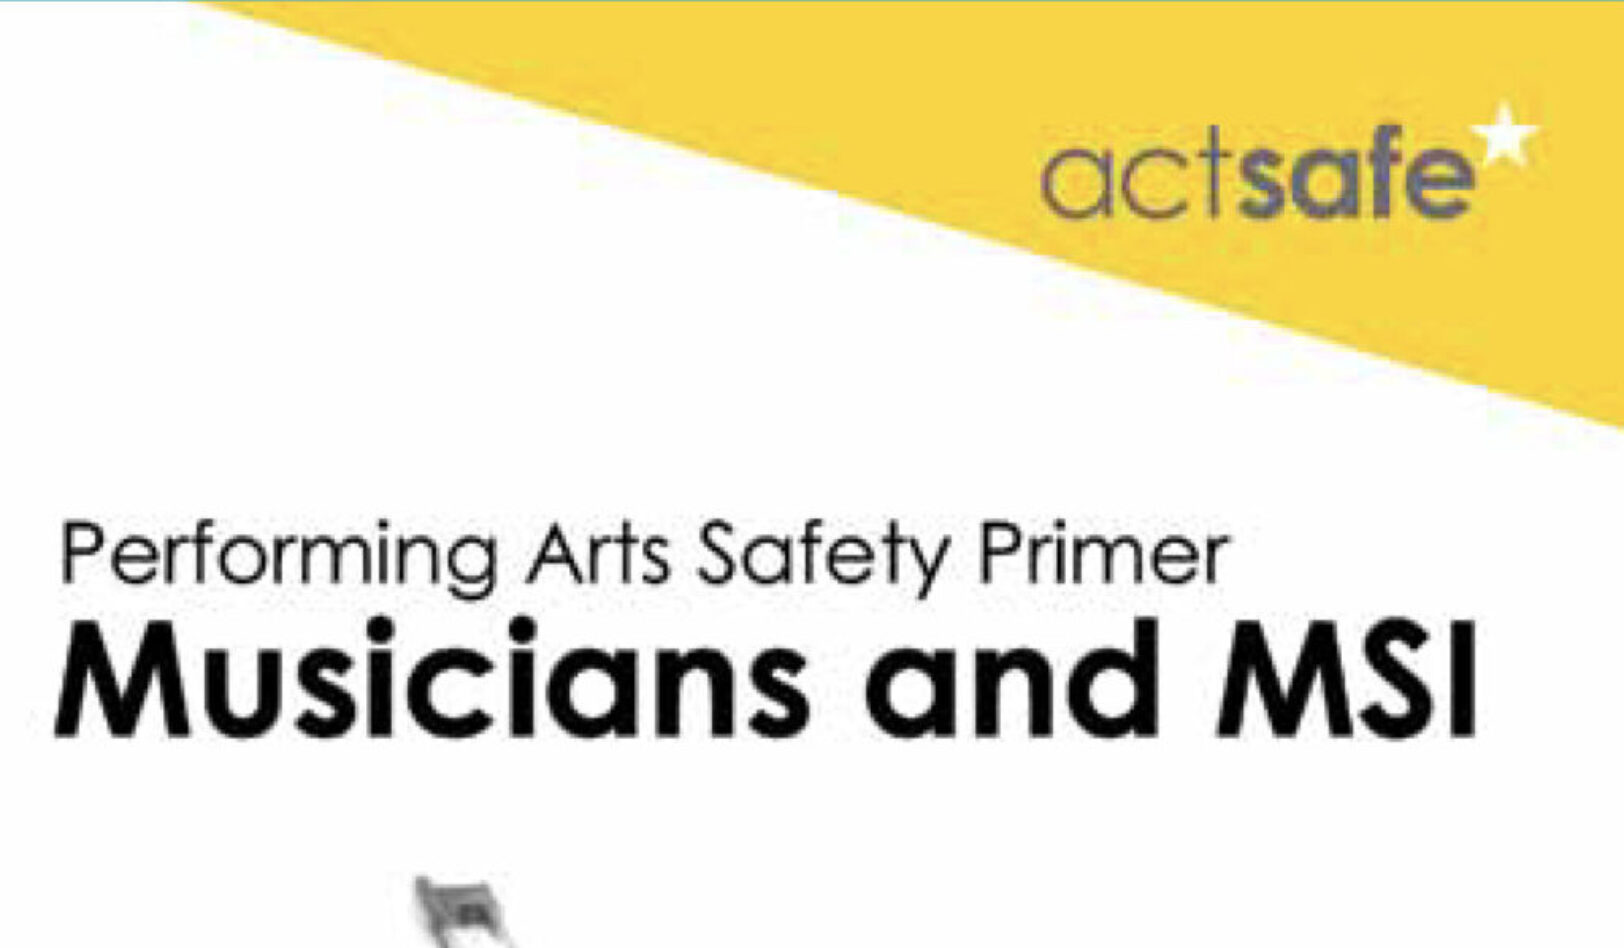 Musicians and MSI Performing Arts Safety Primer